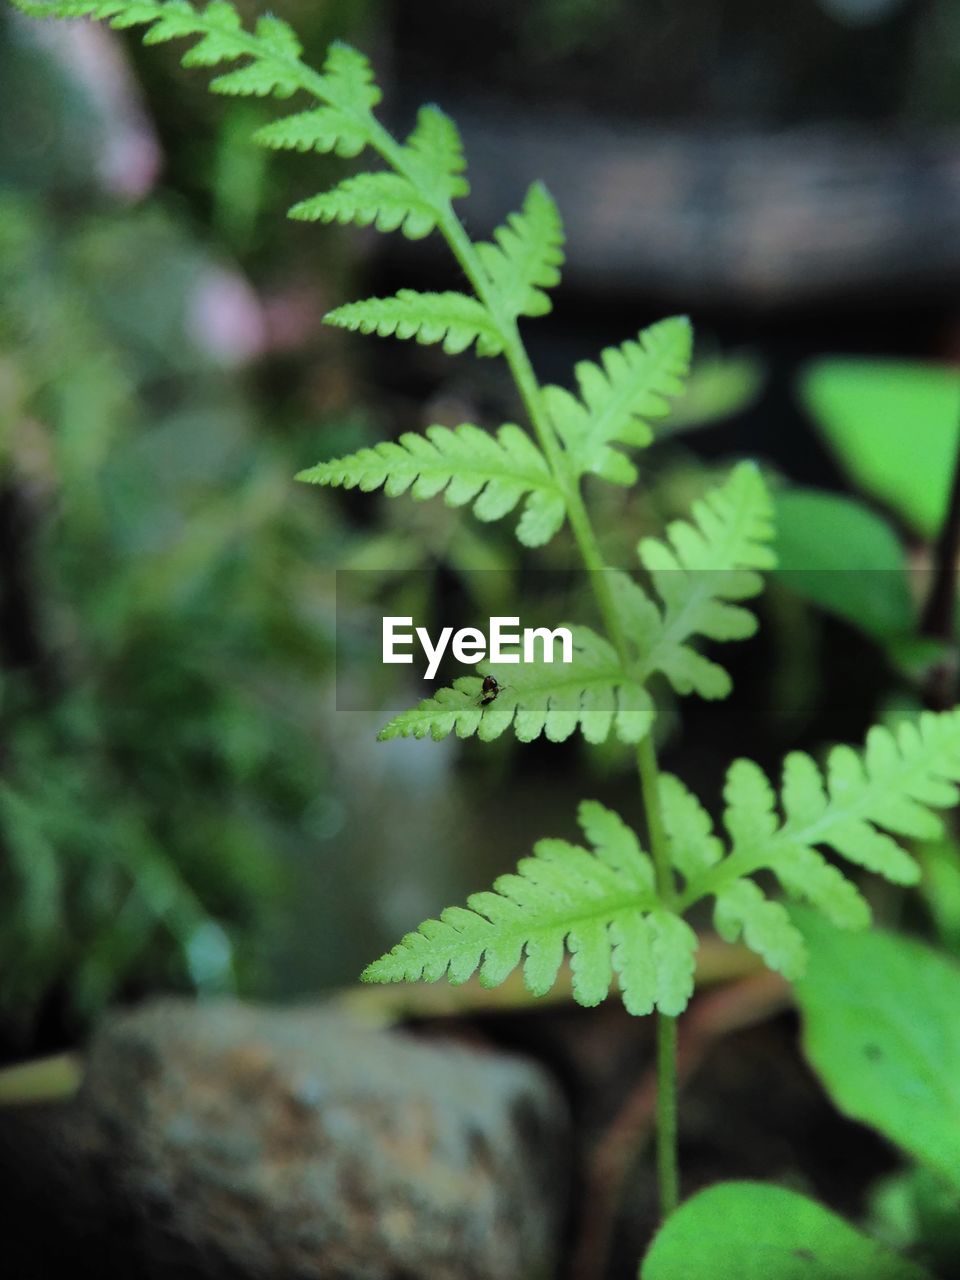 CLOSE-UP OF FERN LEAVES ON PLANT